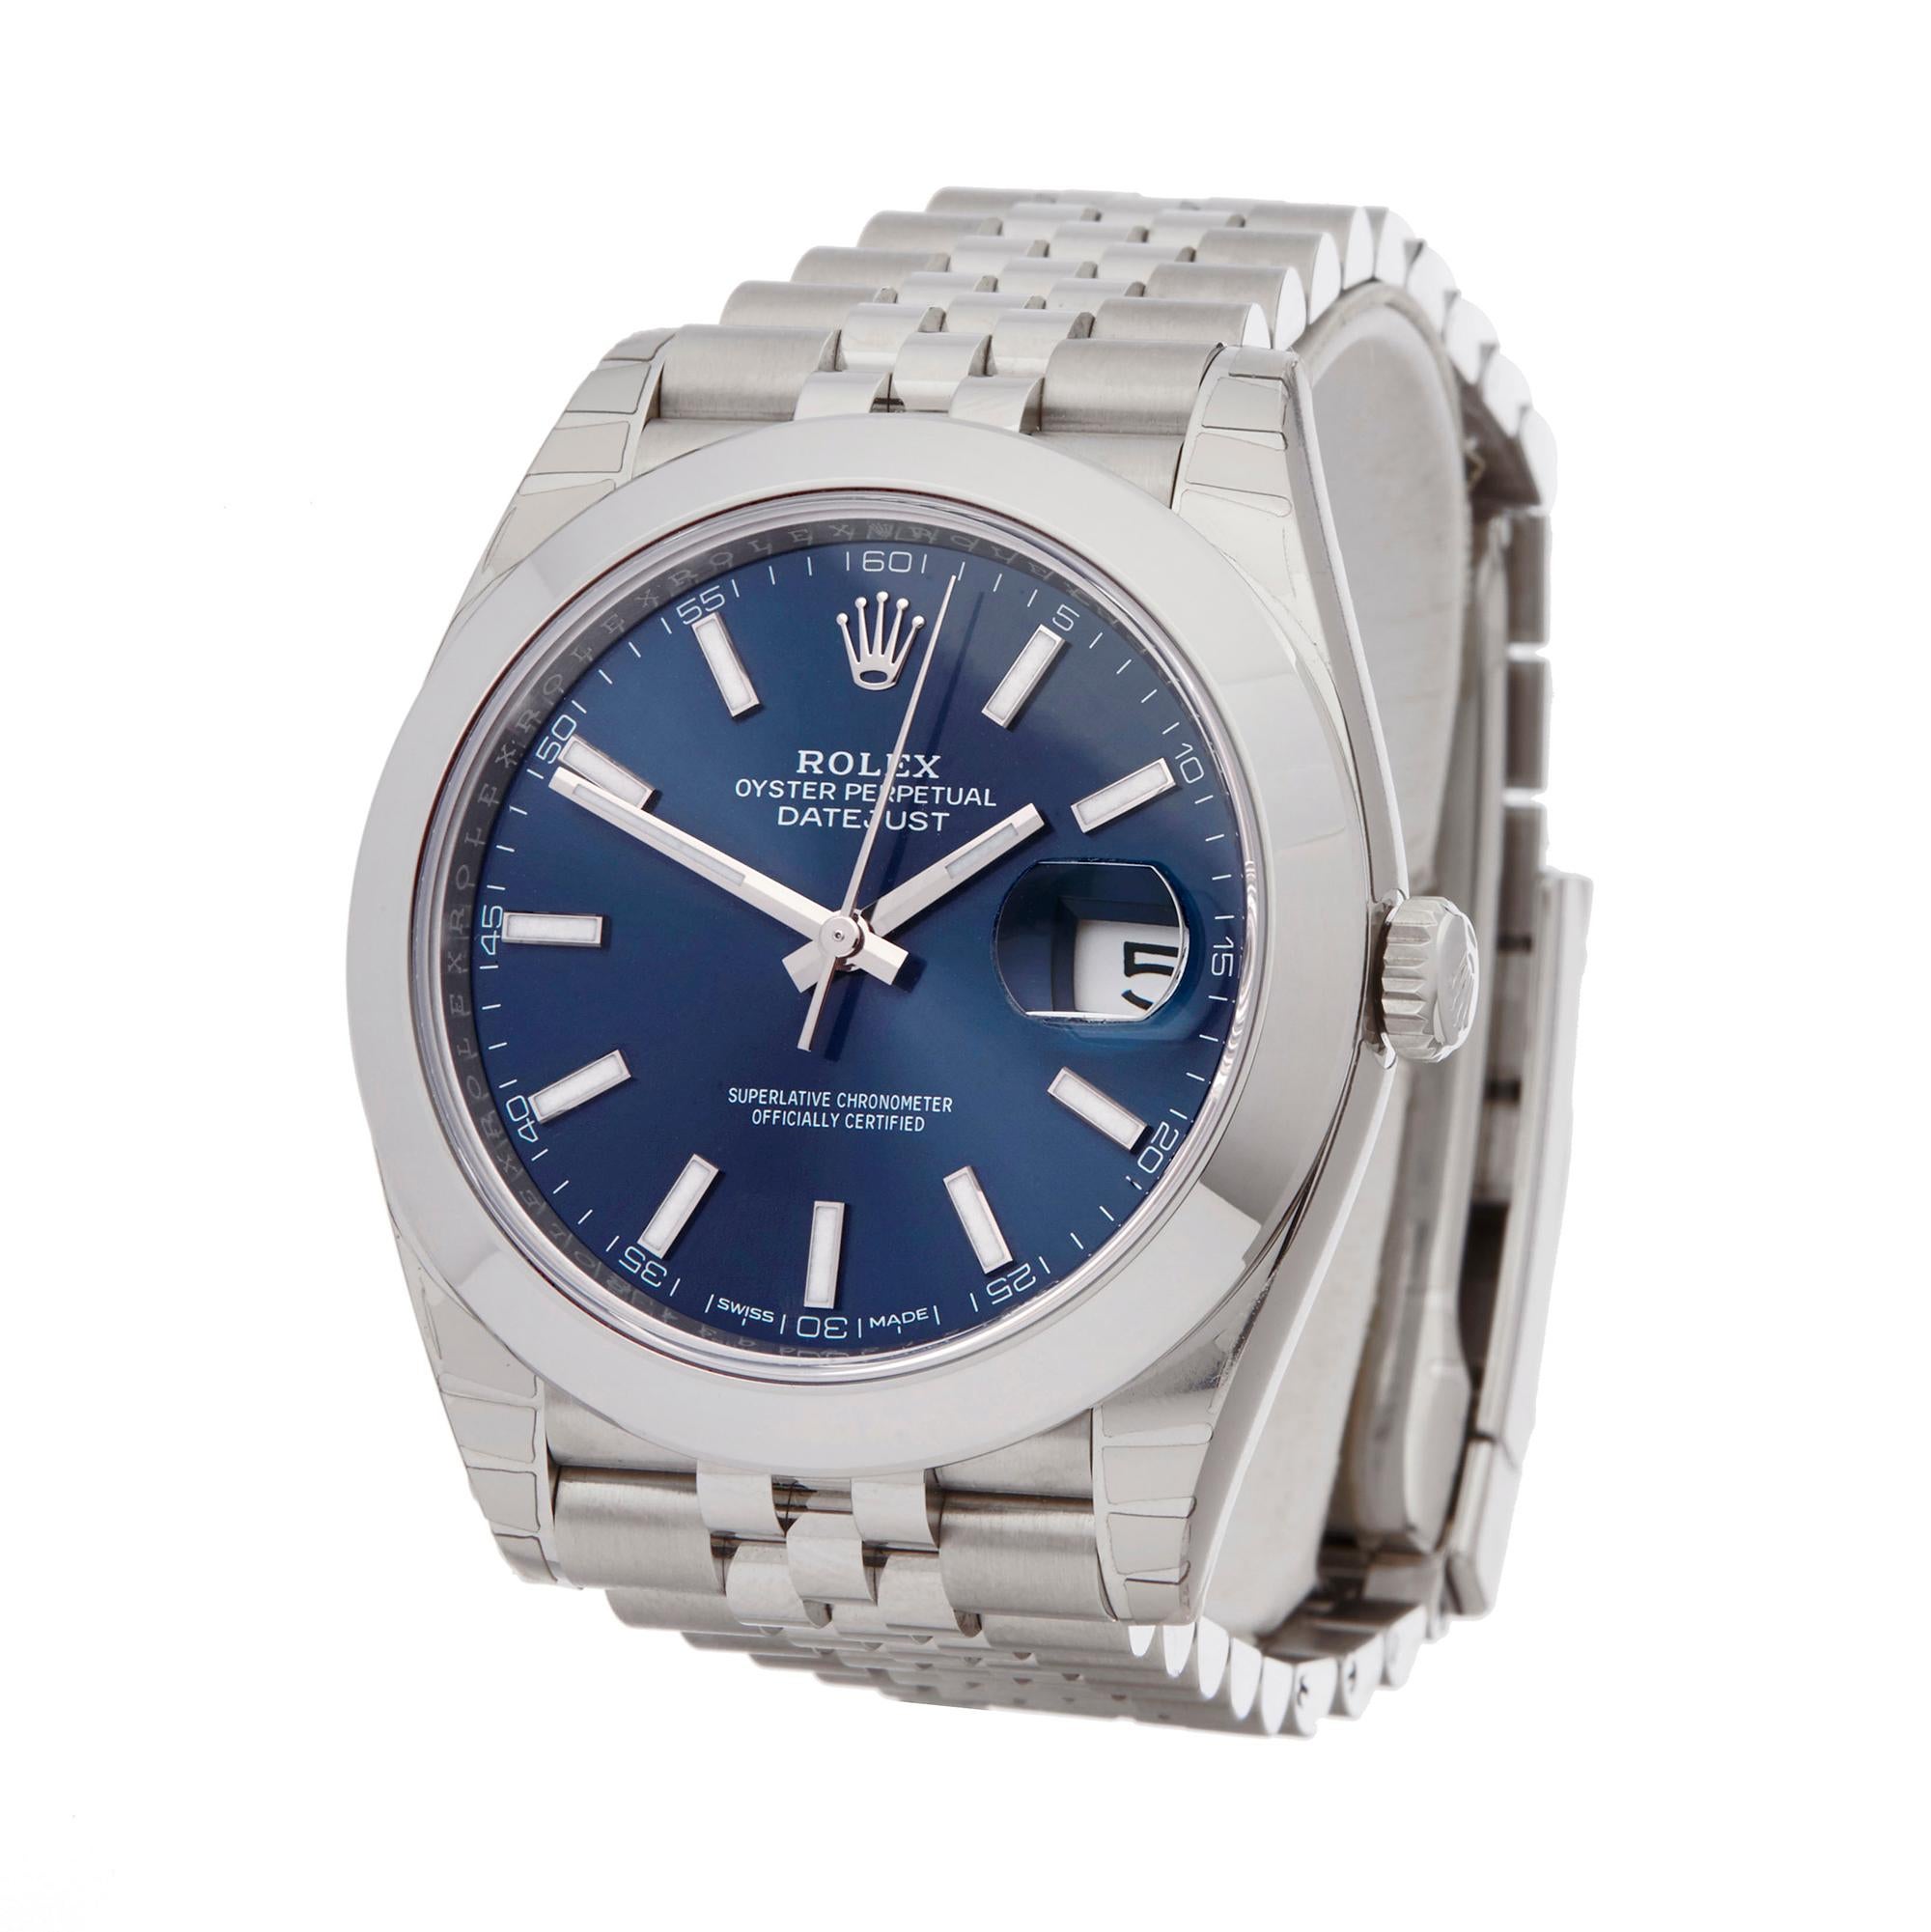 Ref: COM2242
Manufacturer: Rolex
Model: Datejust II
Model Ref: 126300
Age: 9th November 2017
Gender: Mens
Complete With: Box, Manuals, Guarantee, Bezel Guard & Swing Tags 
Dial: Blue Baton
Glass: Sapphire Crystal
Movement: Automatic
Water